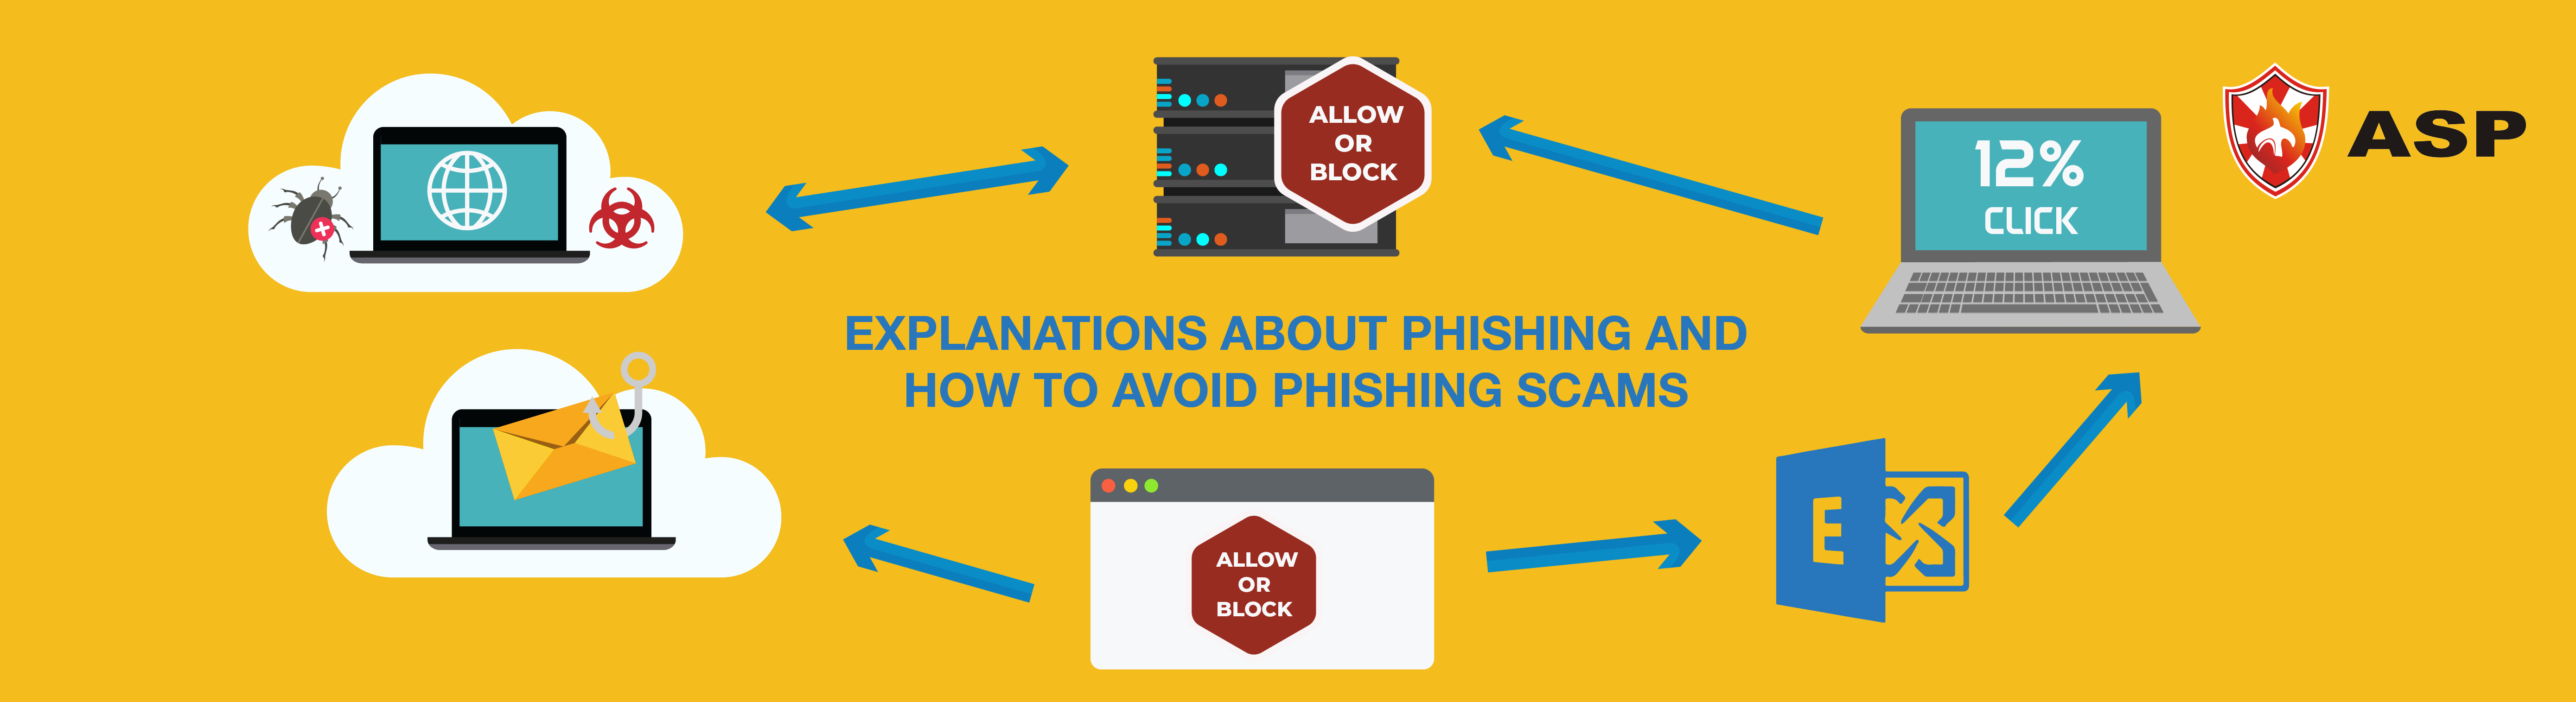 Explanations about Phishing and How to Avoid Phishing Scams